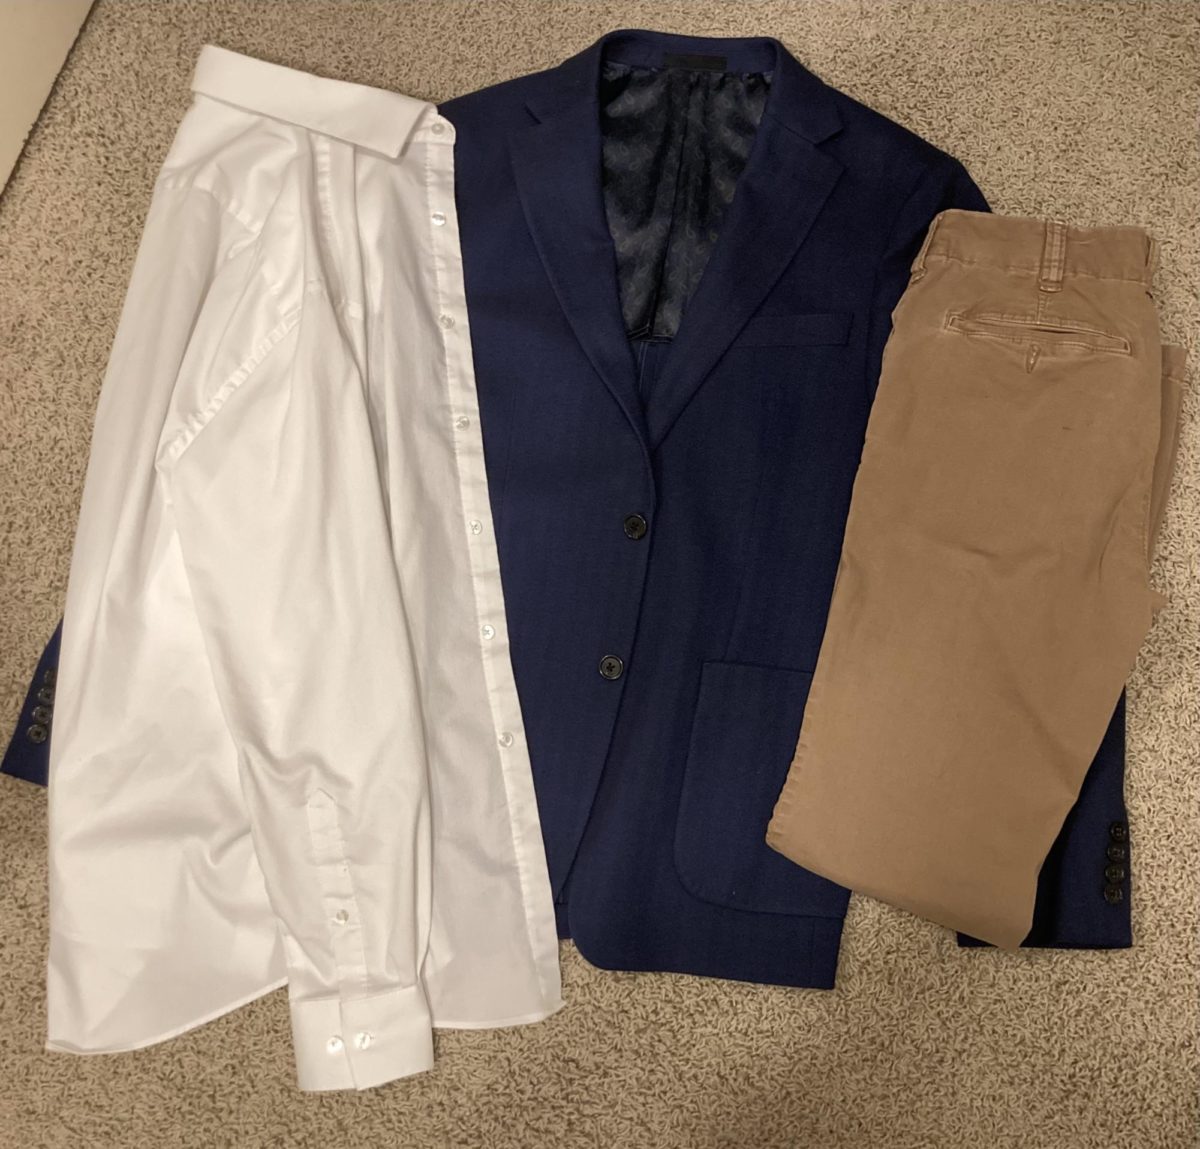 Yousha’s spectacular homecoming outfit from last year’s dance consisted of a navy suit from Macy’s, a white button down from Nordstrom, and khakis from American Eagle.